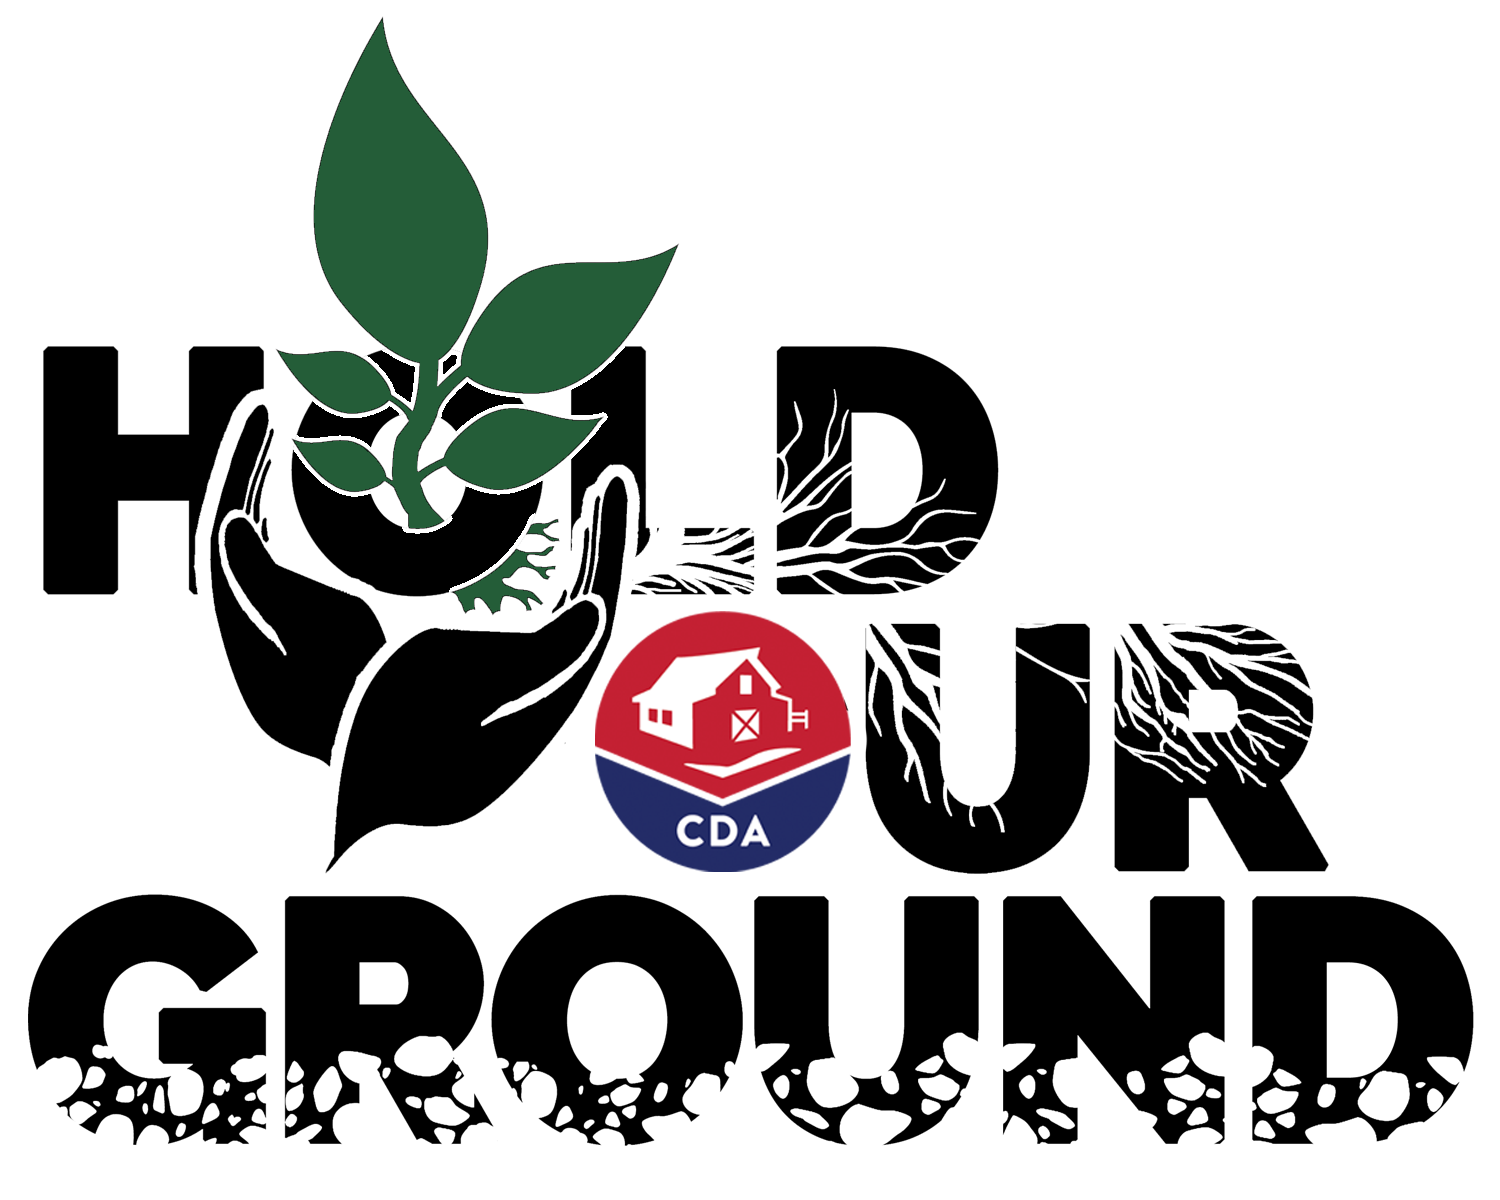 Hold Your Ground logo which features a pair of hands holding a sprouting plant and the CDA logo which features a red barn.